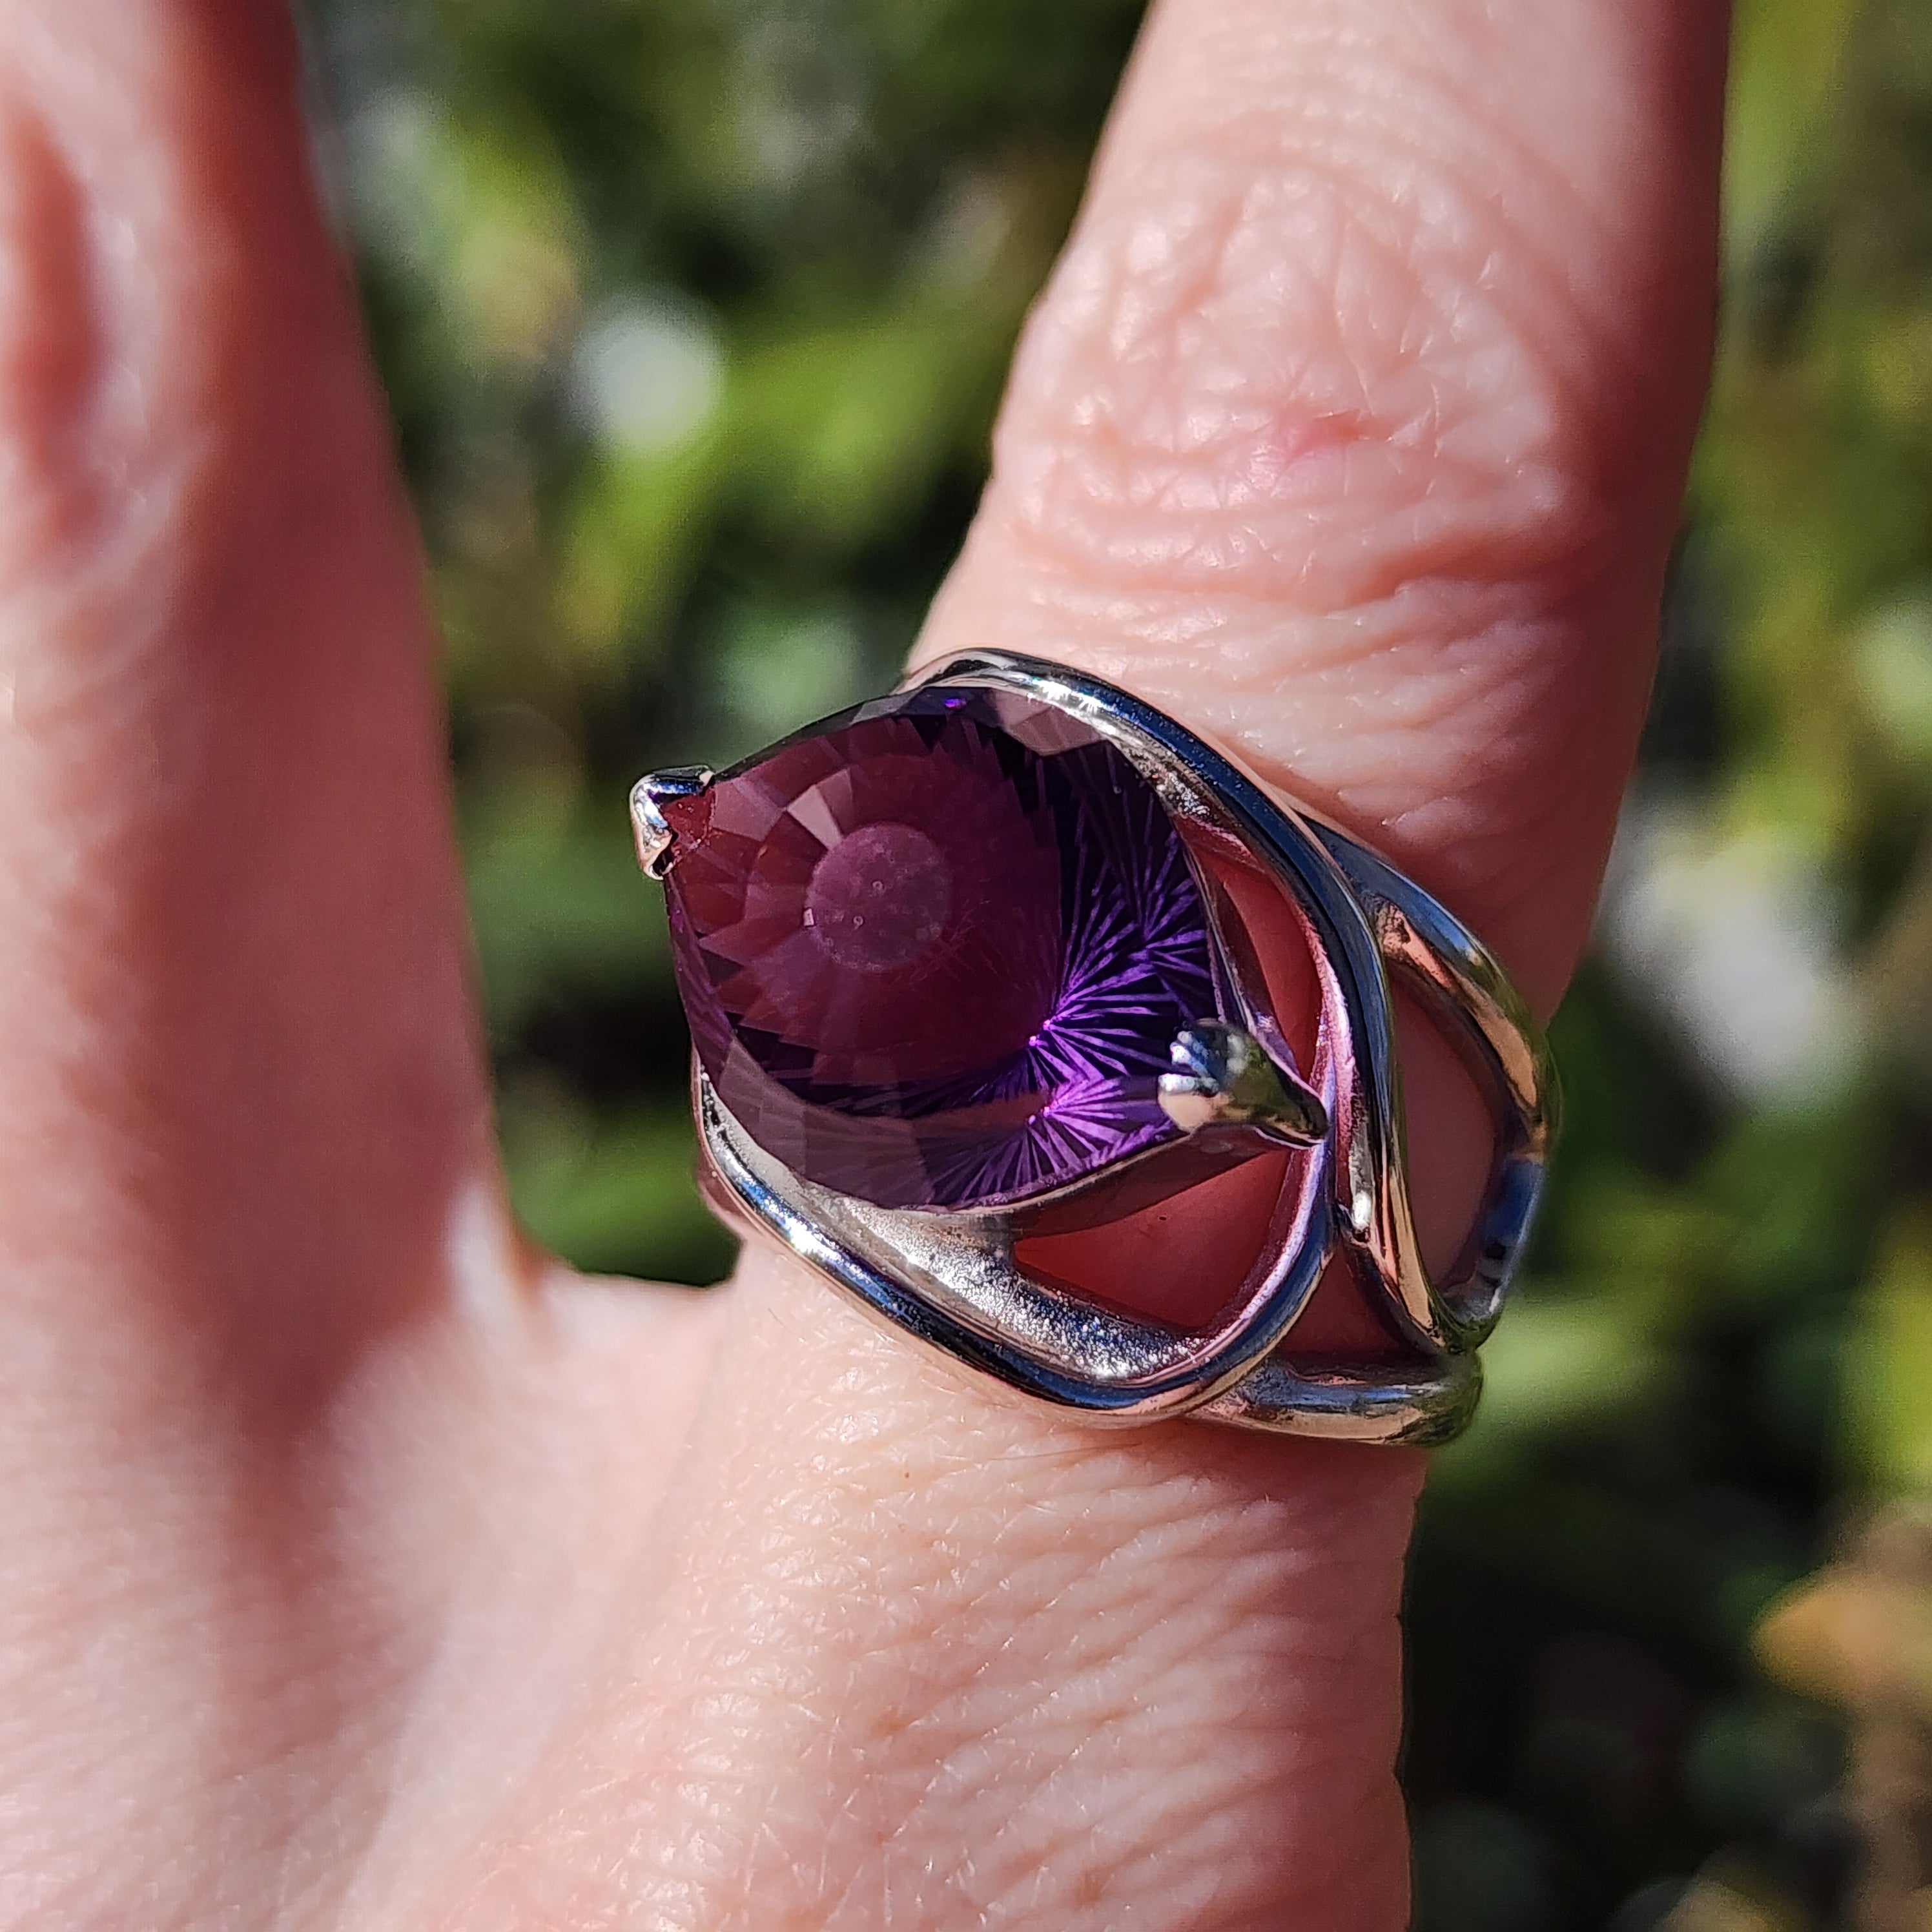 Amethyst Evil Eye Adjustable Finger Cuff Ring .925 Silver for Intuition, Luck, Protection and Purification